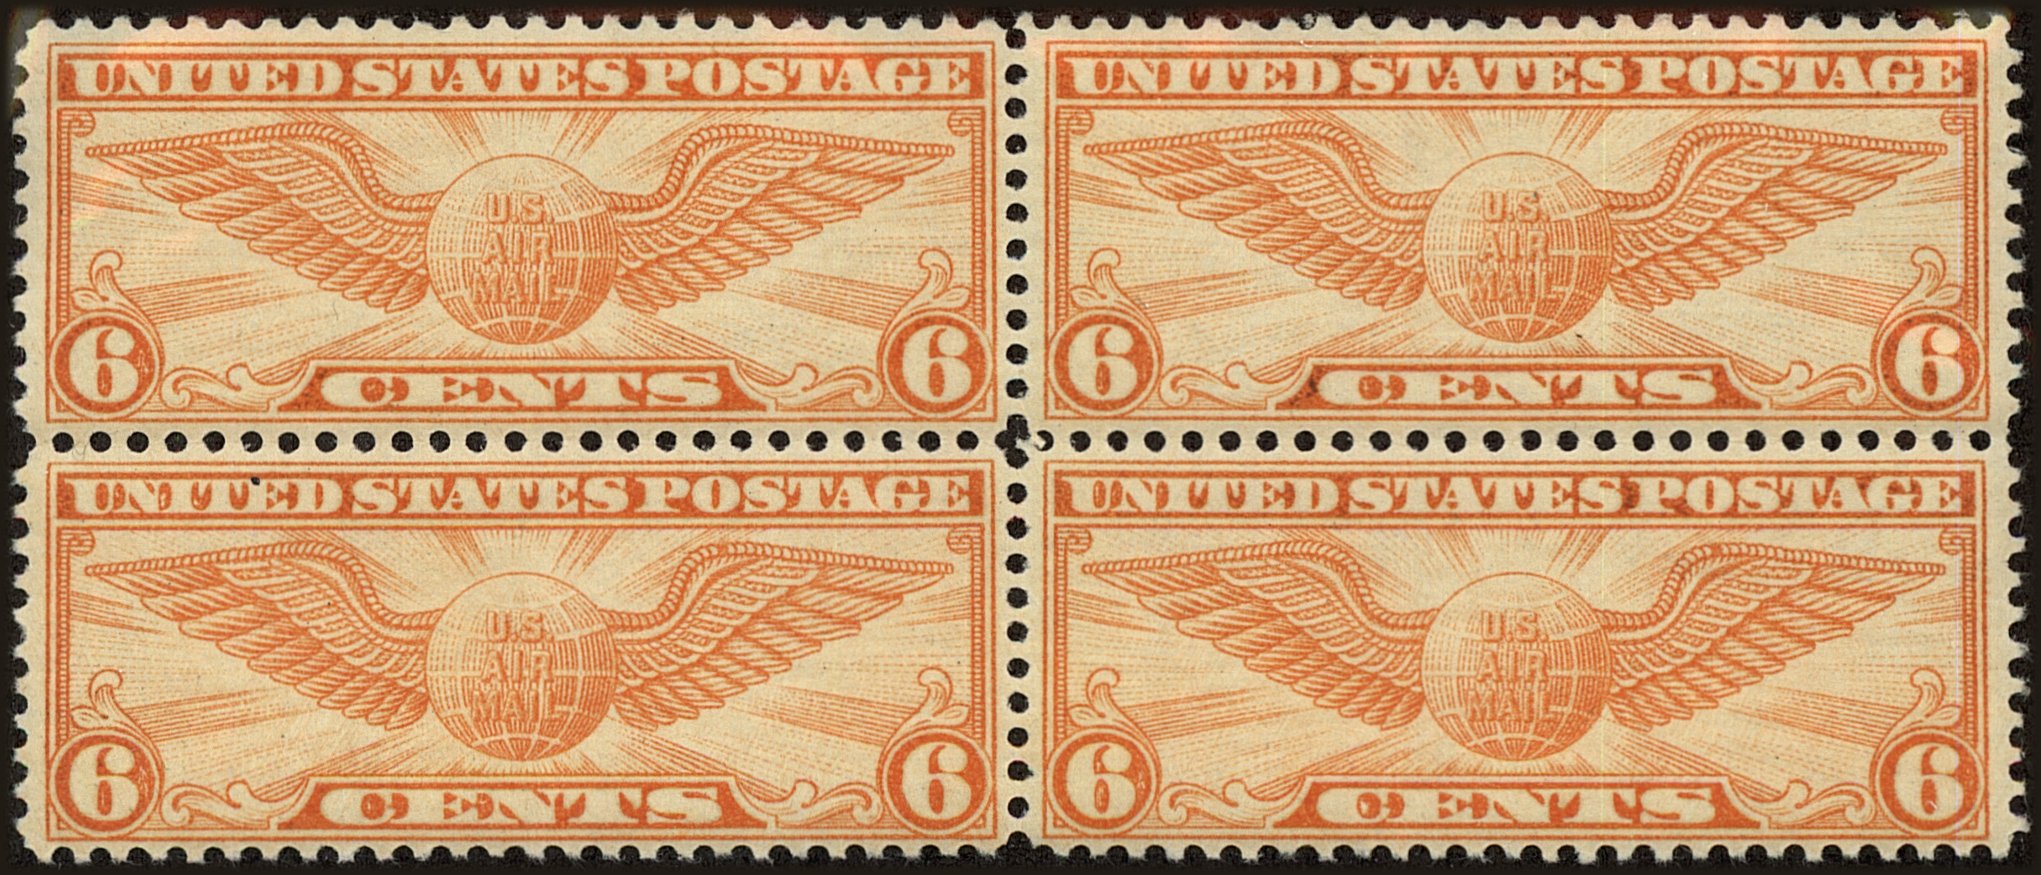 Front view of United States C19 collectors stamp